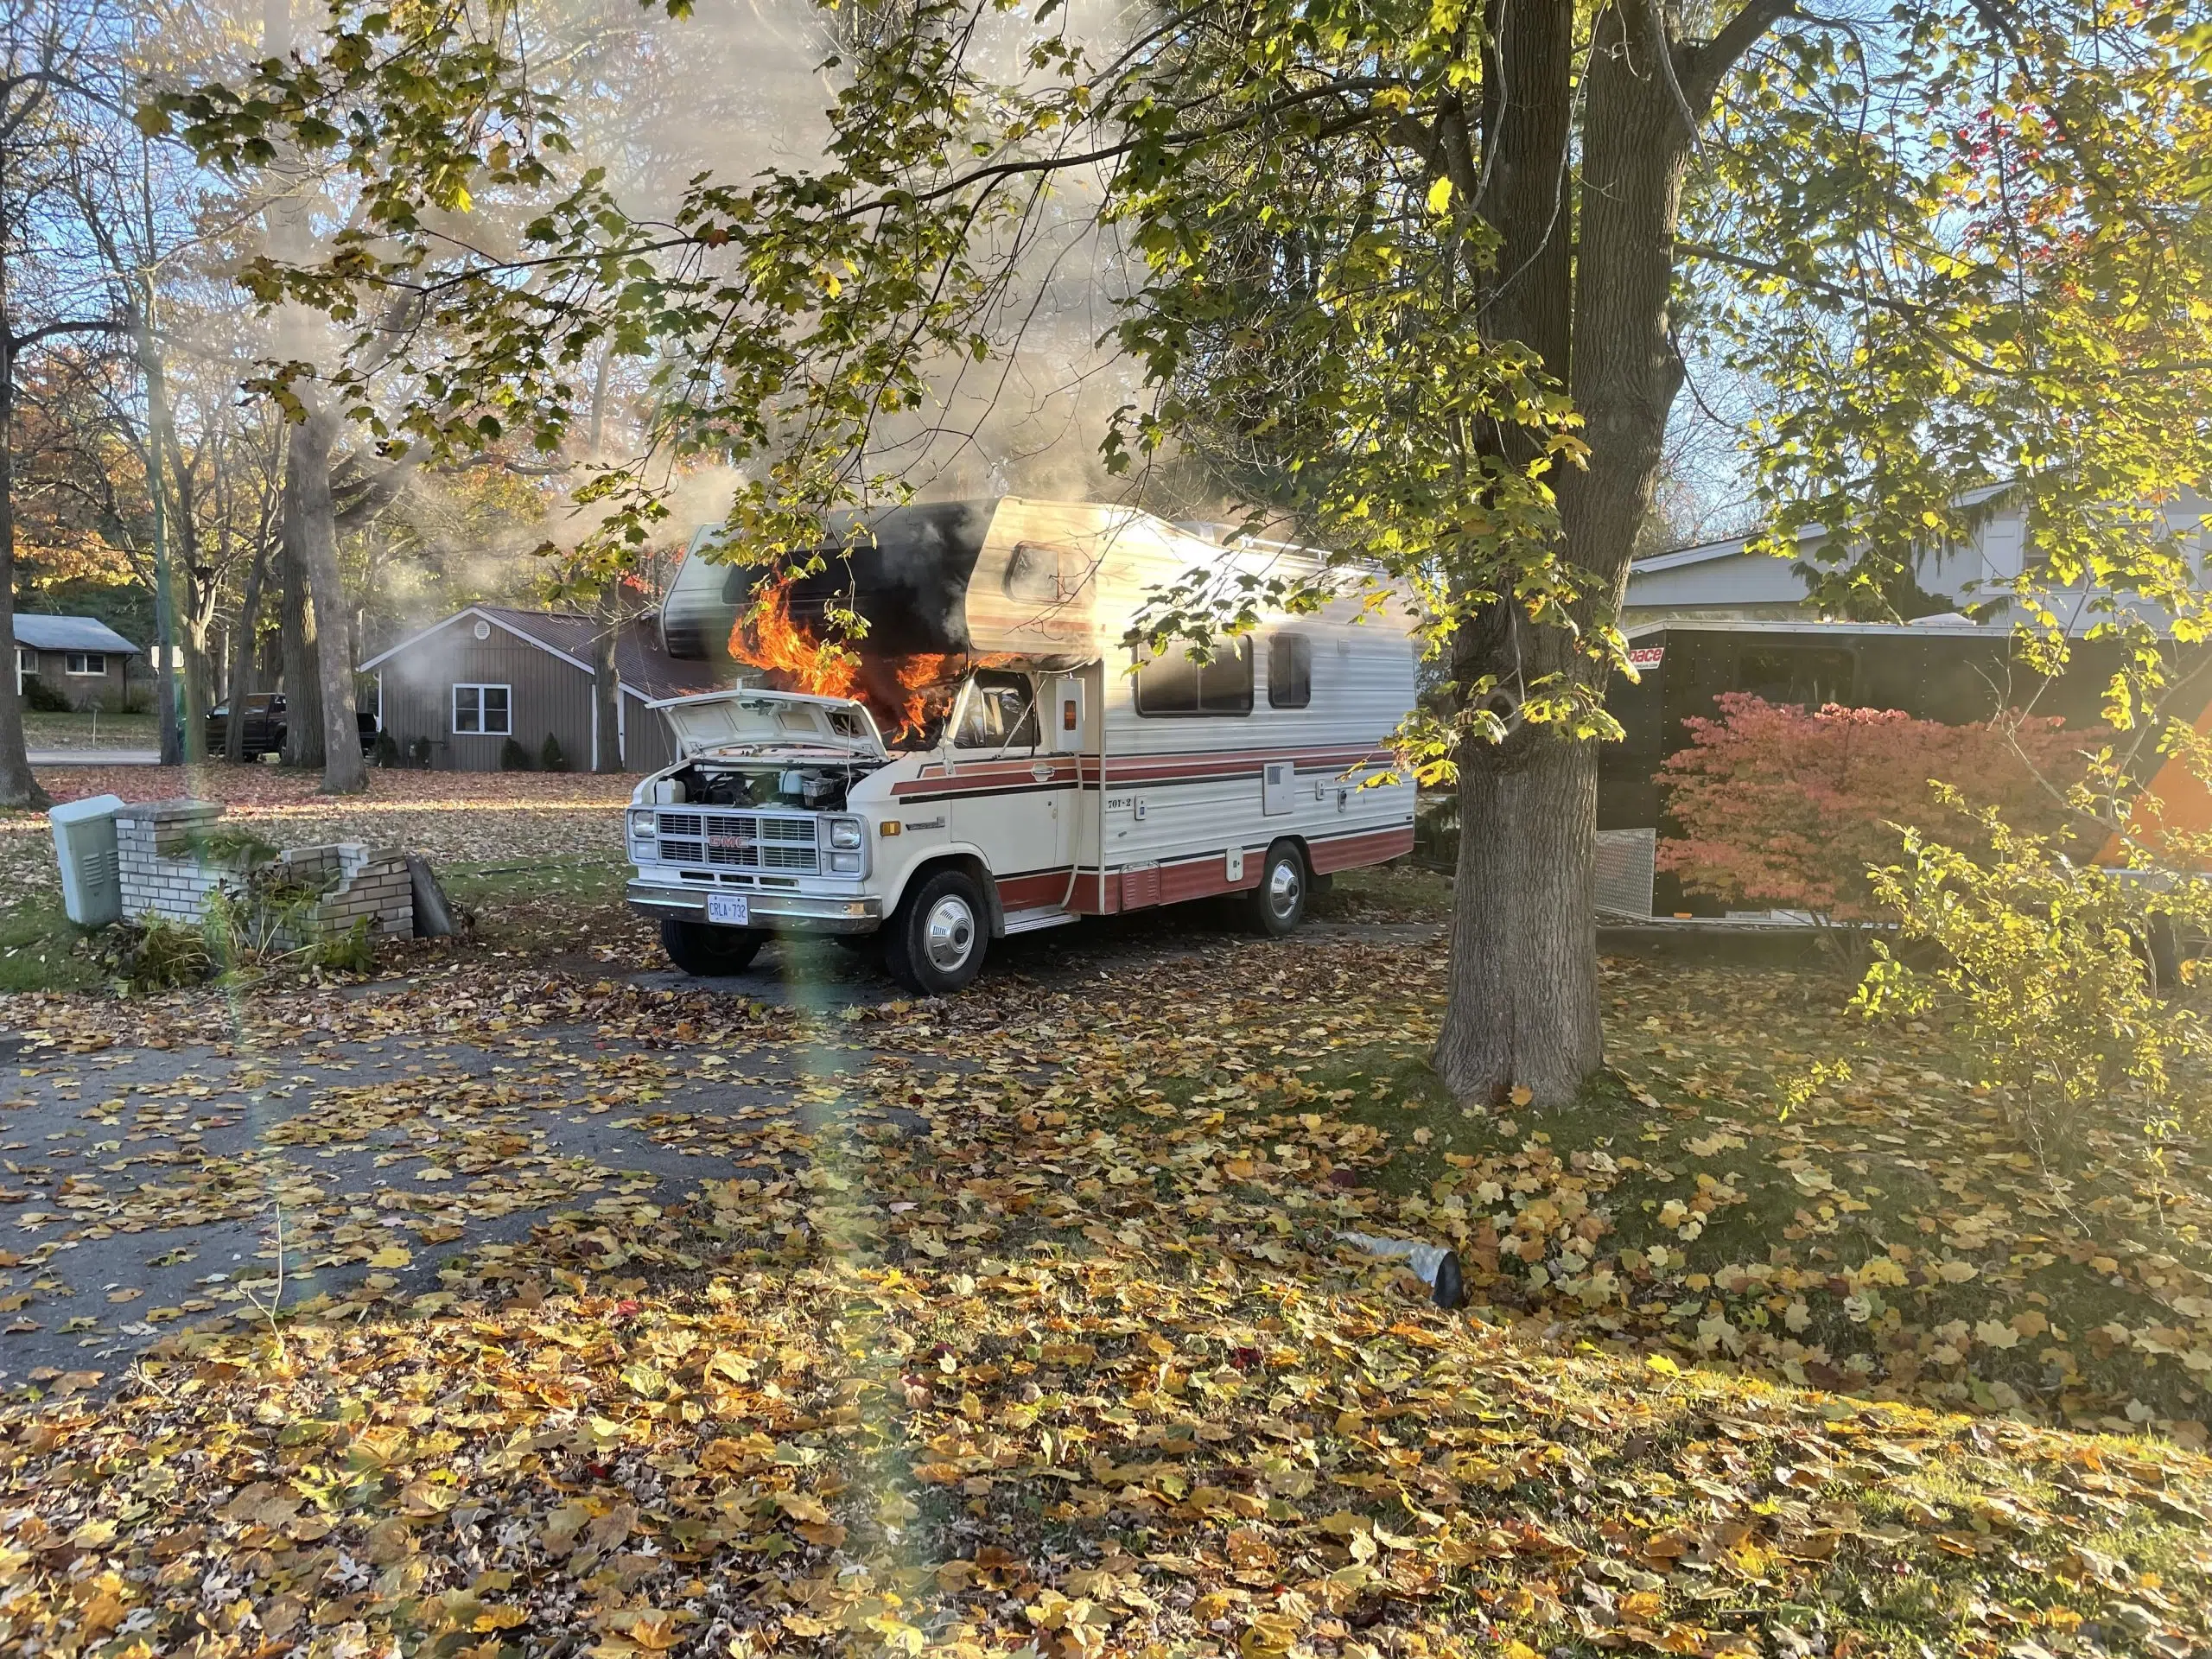 Quinte West fire fighters put out RV fire in Murray Ward